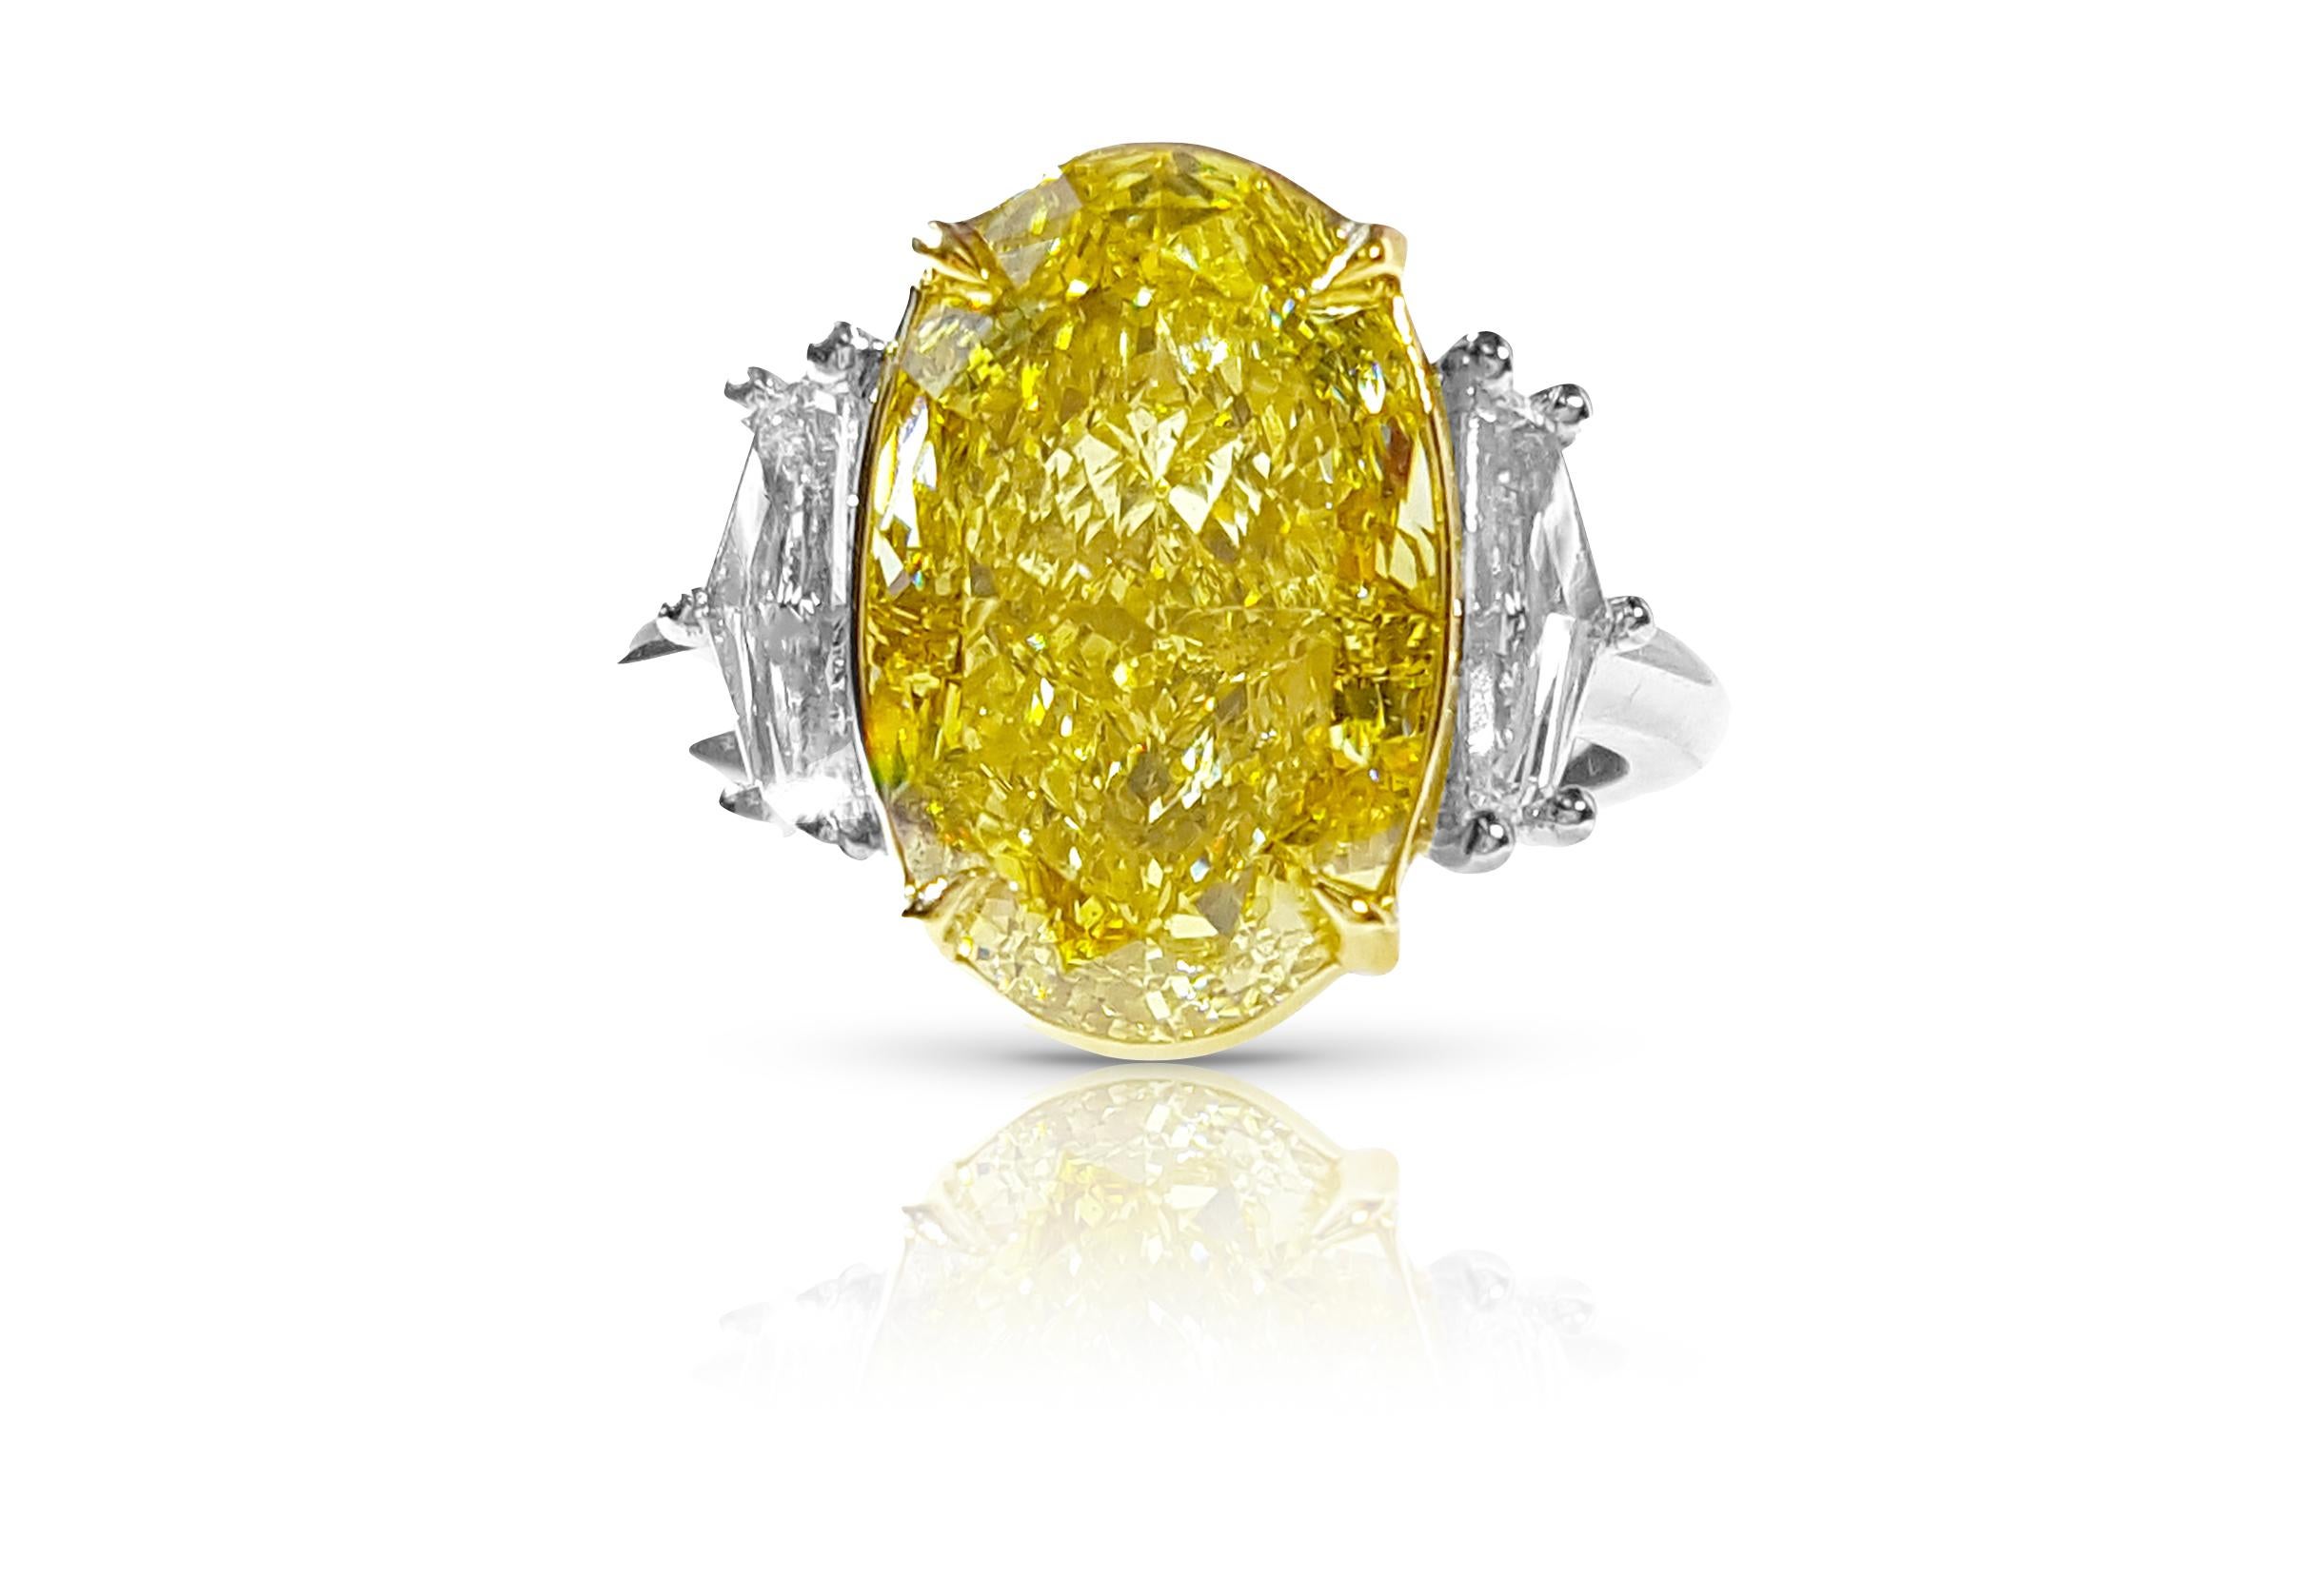 Introducing an Exquisite Three-Stone Engagement Ring showcasing a captivating 6.00-plus carat Fancy Intense Yellow Diamond in a stunning Oval cut. Certified as SI1 by GIA. Enhancing the allure, two Epaulet-cut diamonds accompany the centerpiece,